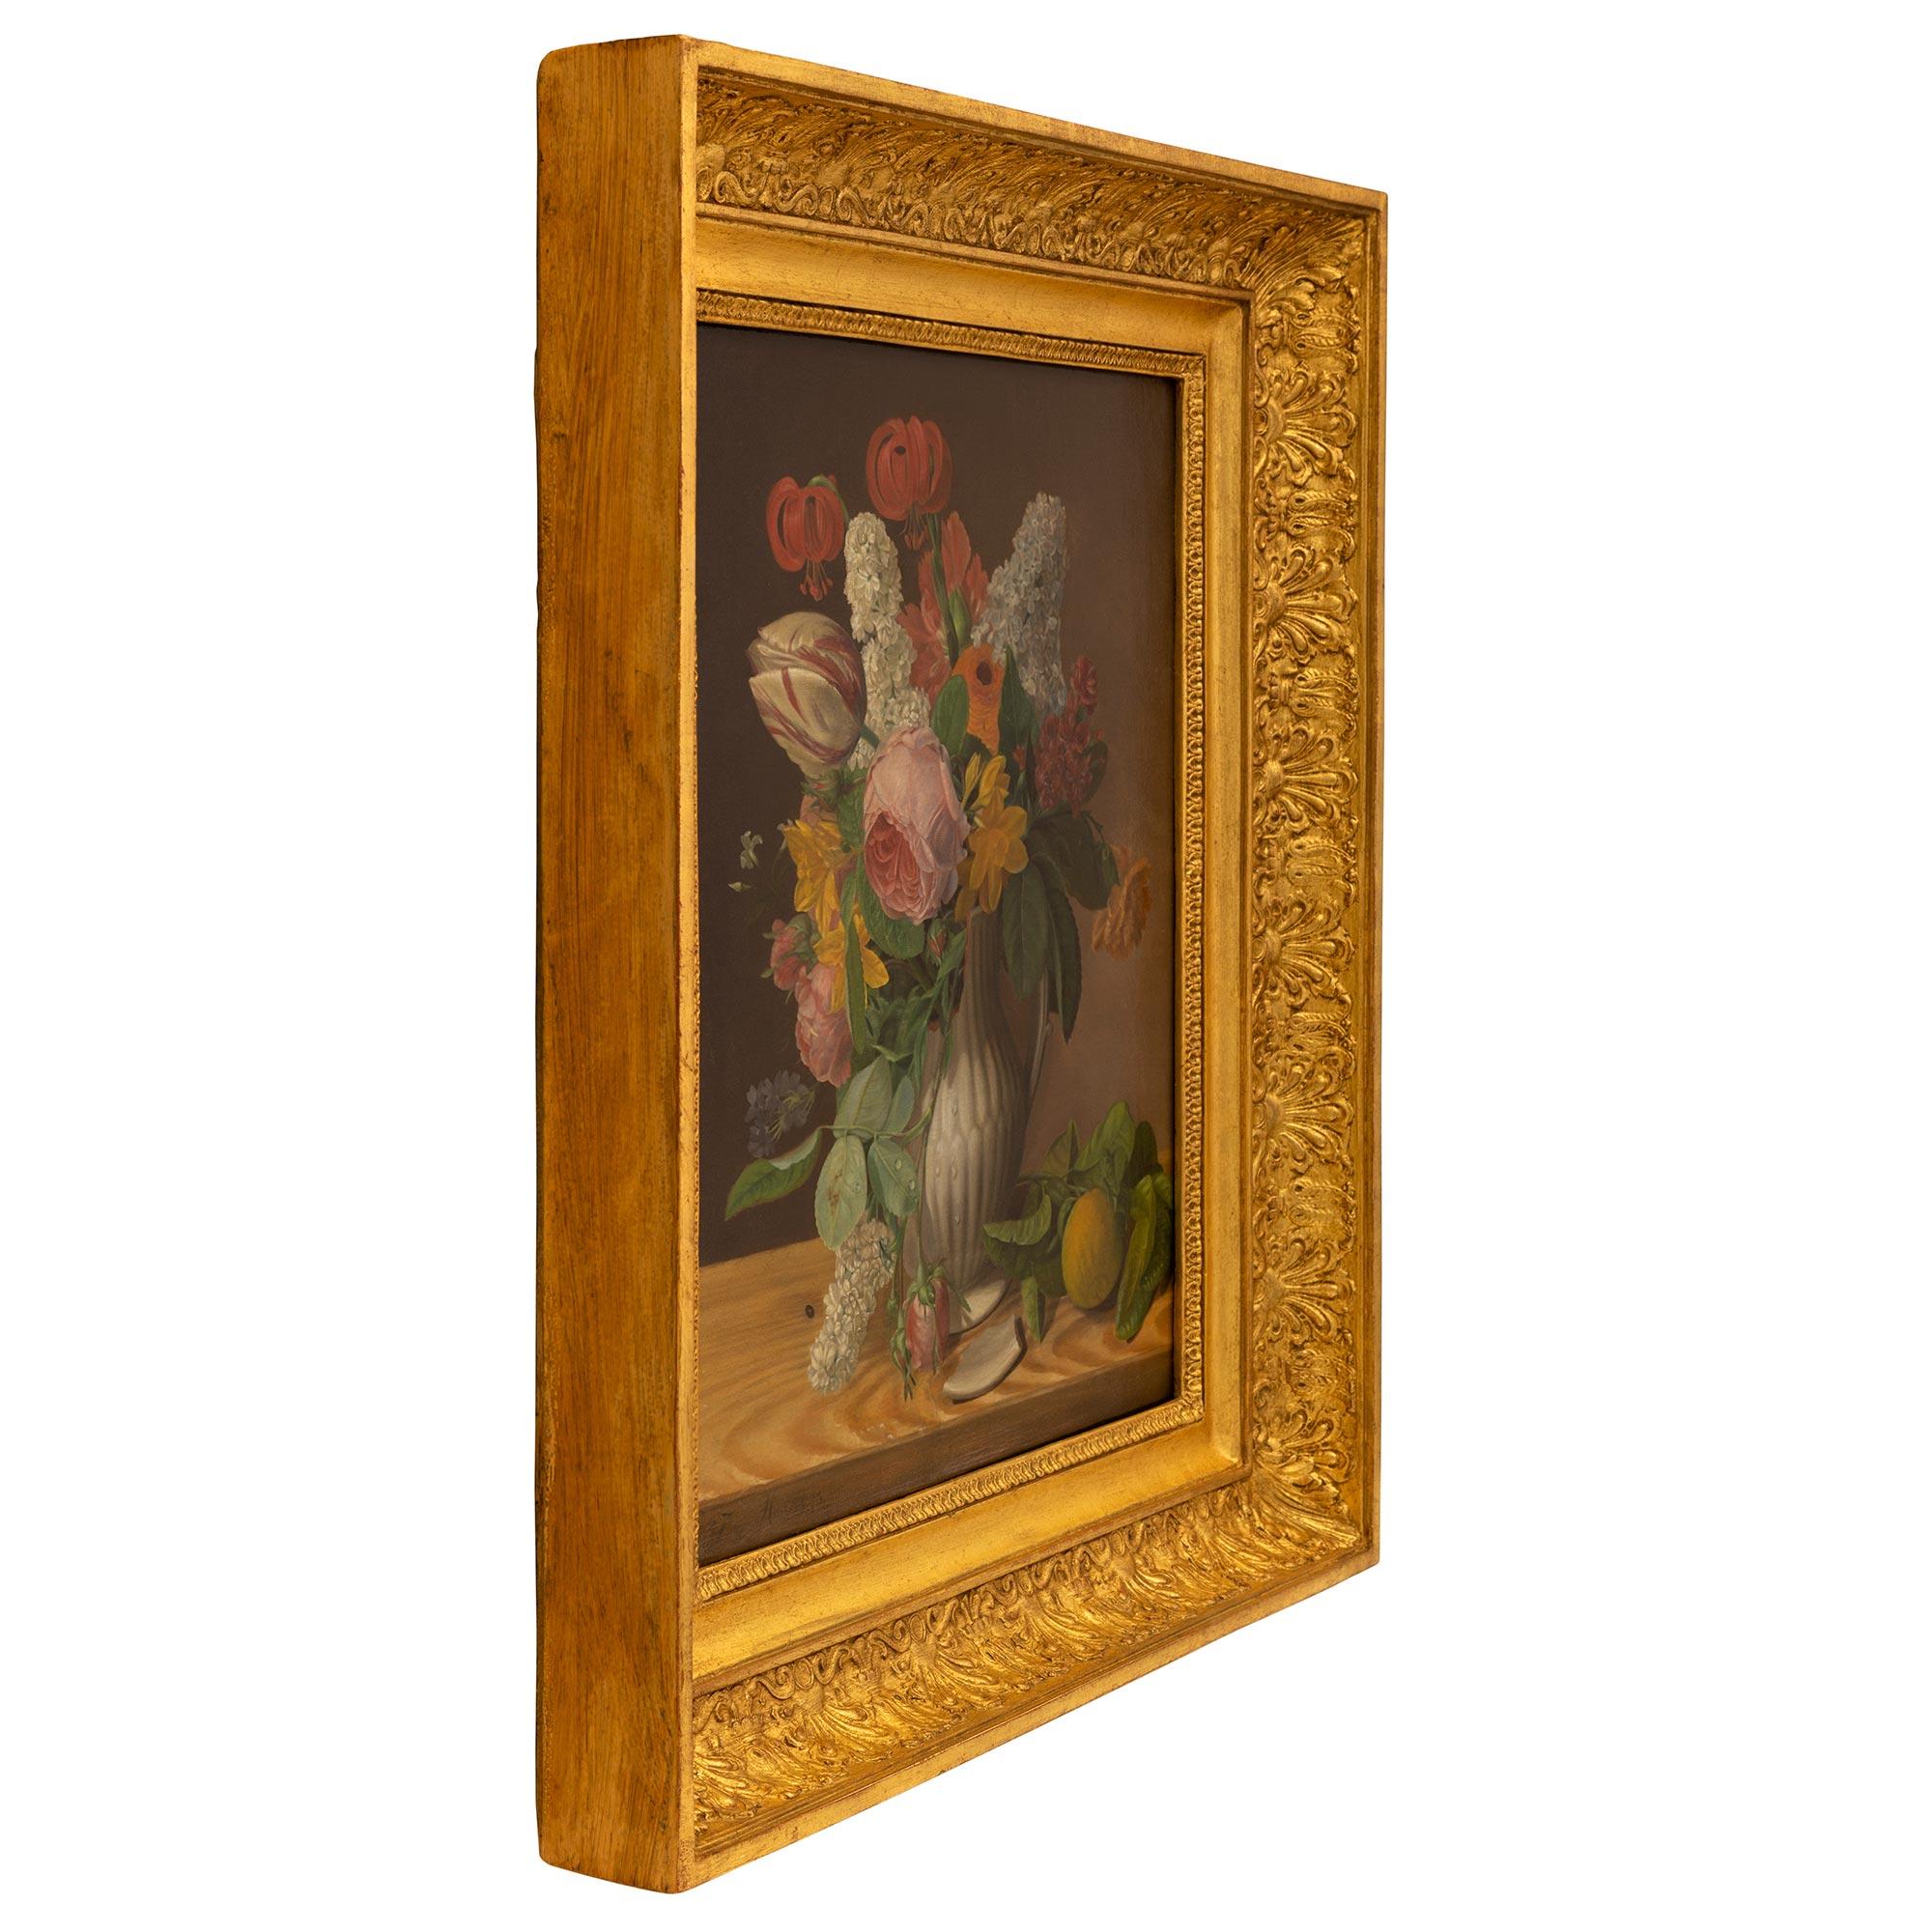 A charming and most decorative Continental mid 19th century still life oil on canvas painting in its original giltwood frame. The painting depicts a lovely finely detailed bouquet of flowers with wonderful vibrant colors in a reeded vase with a